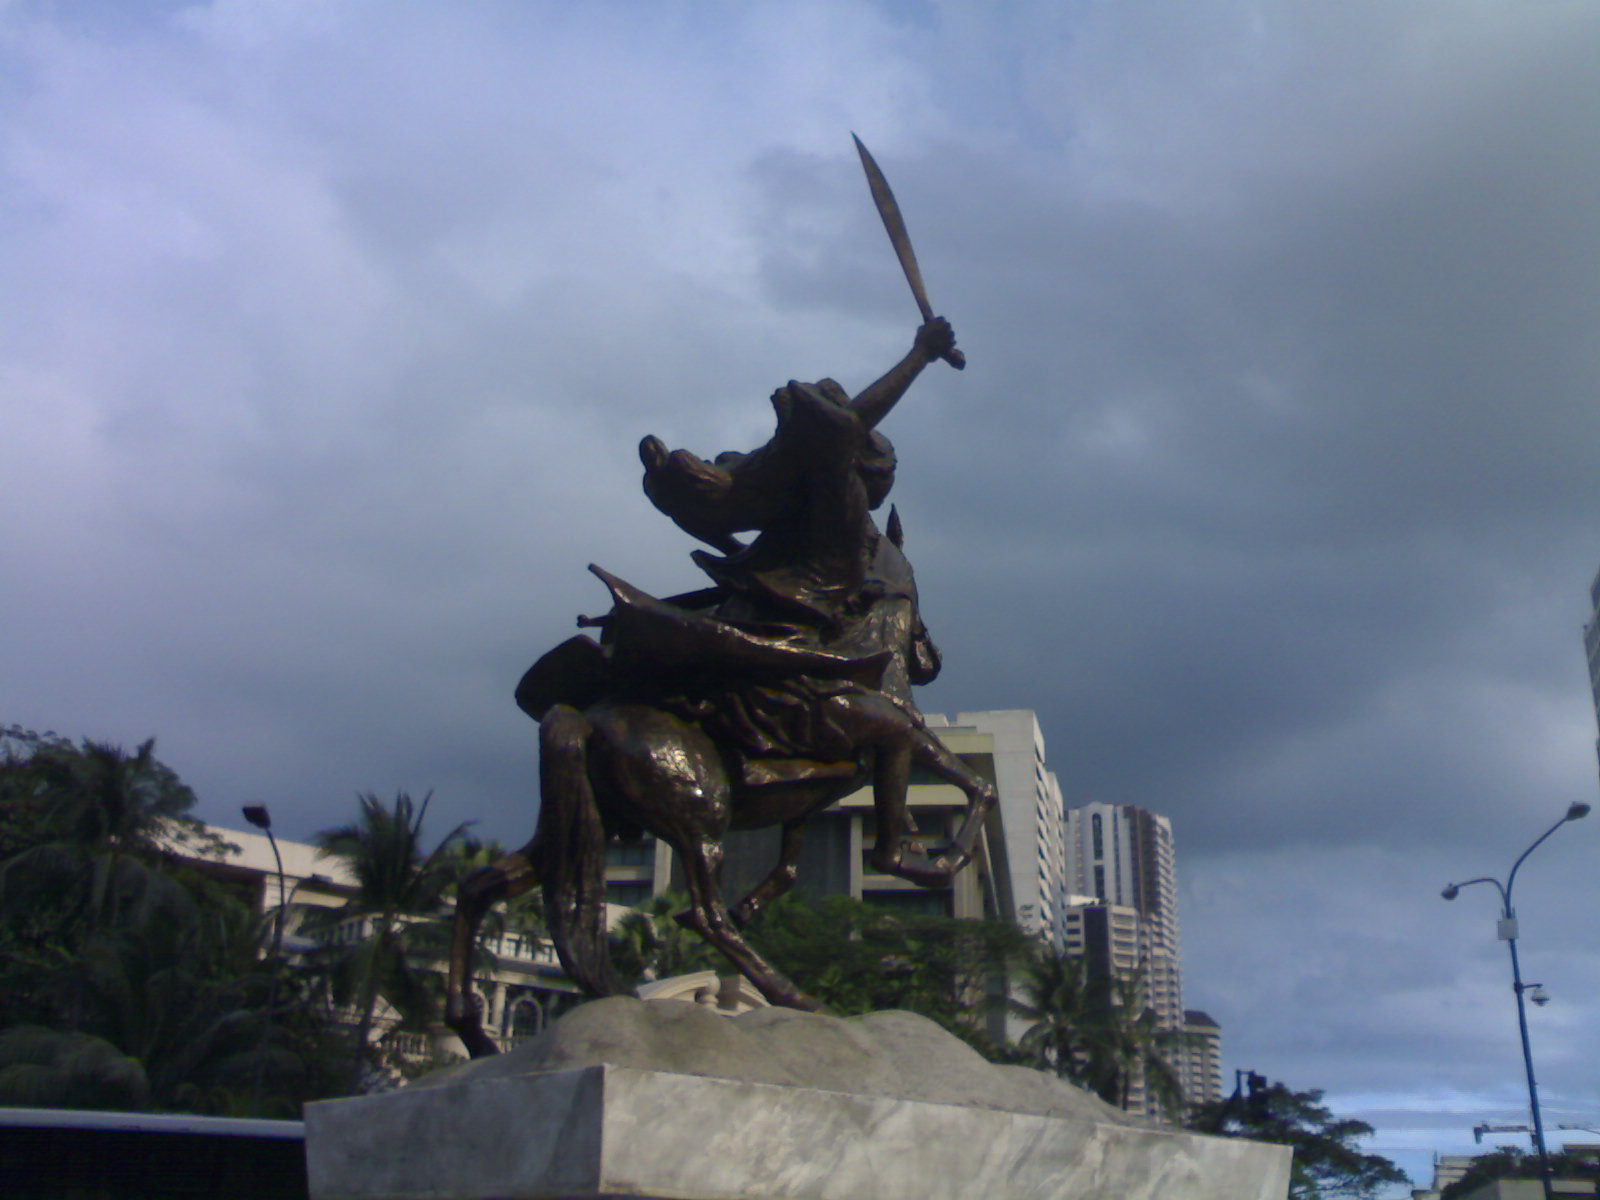 the statue features people on horseback with two spears in their hands